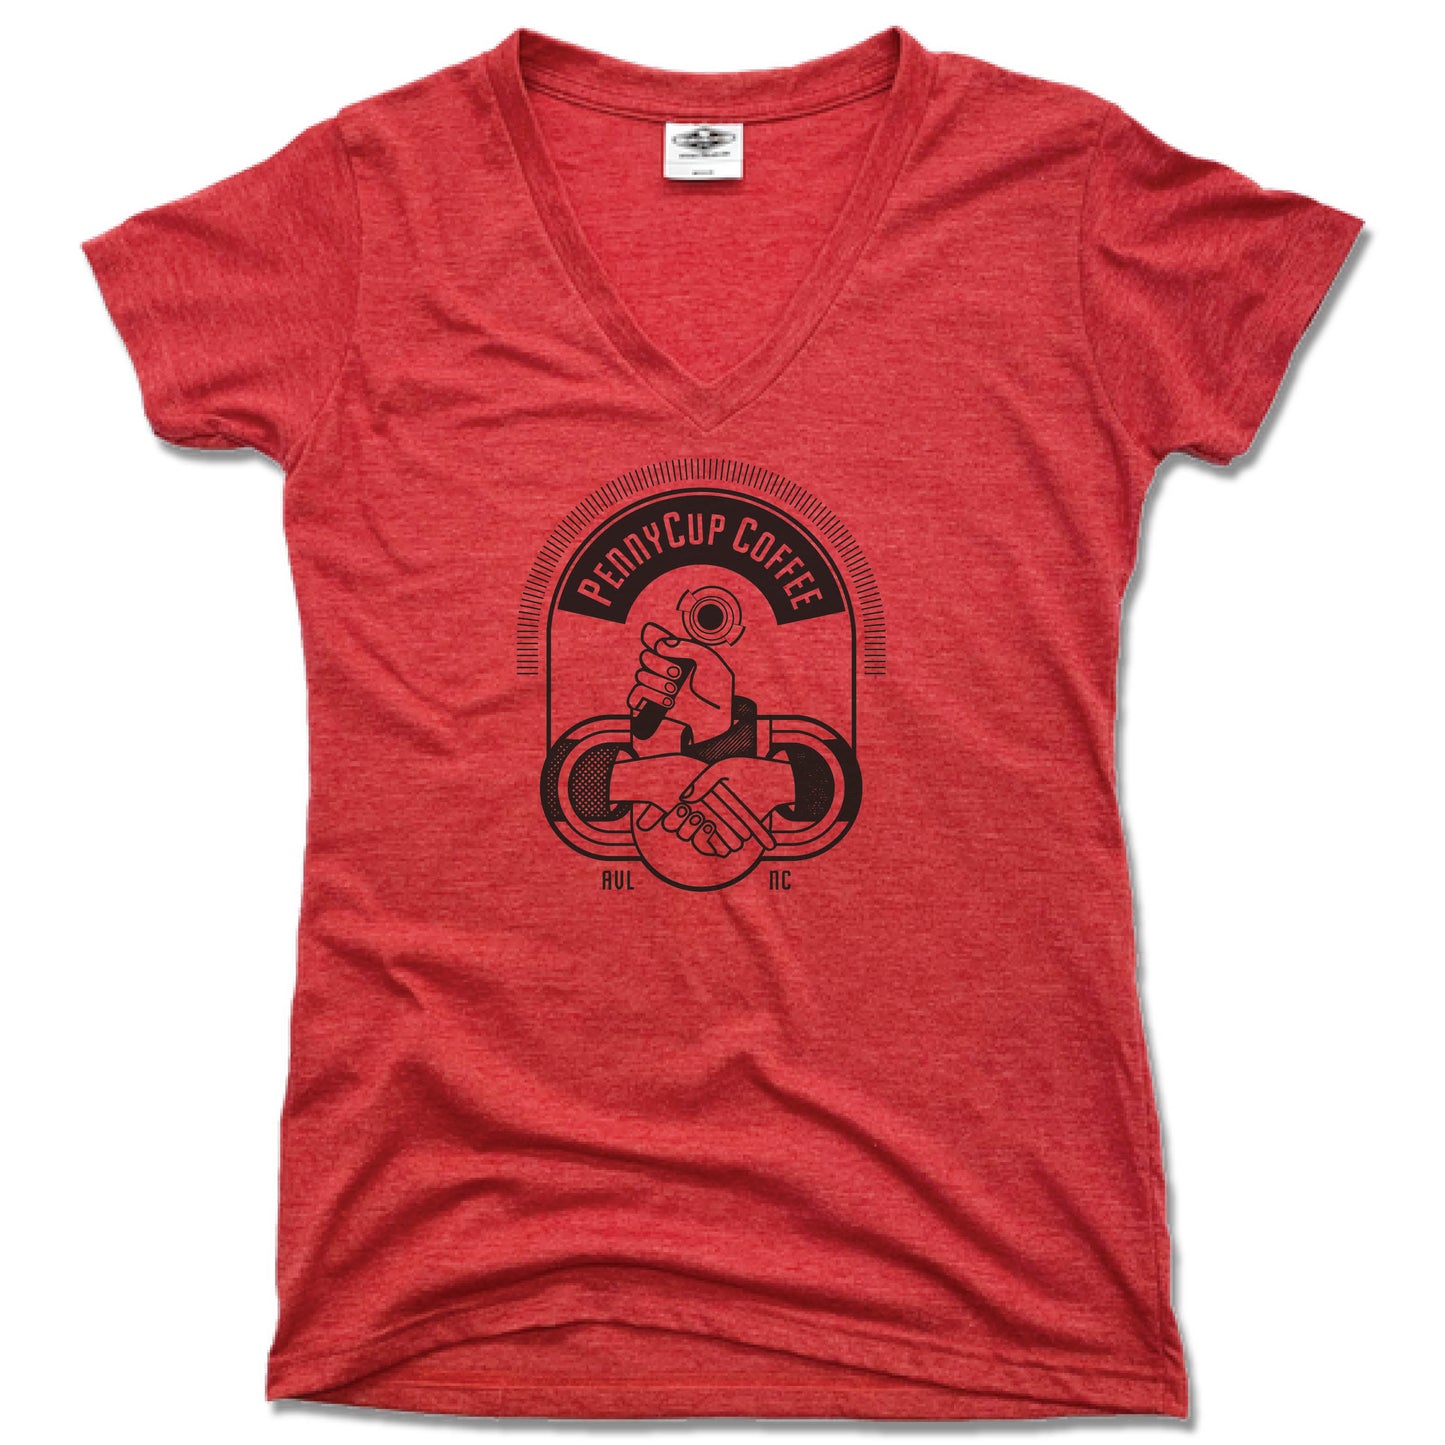 PENNYCUP COFFEE CO | LADIES RED V-NECK | LOGO